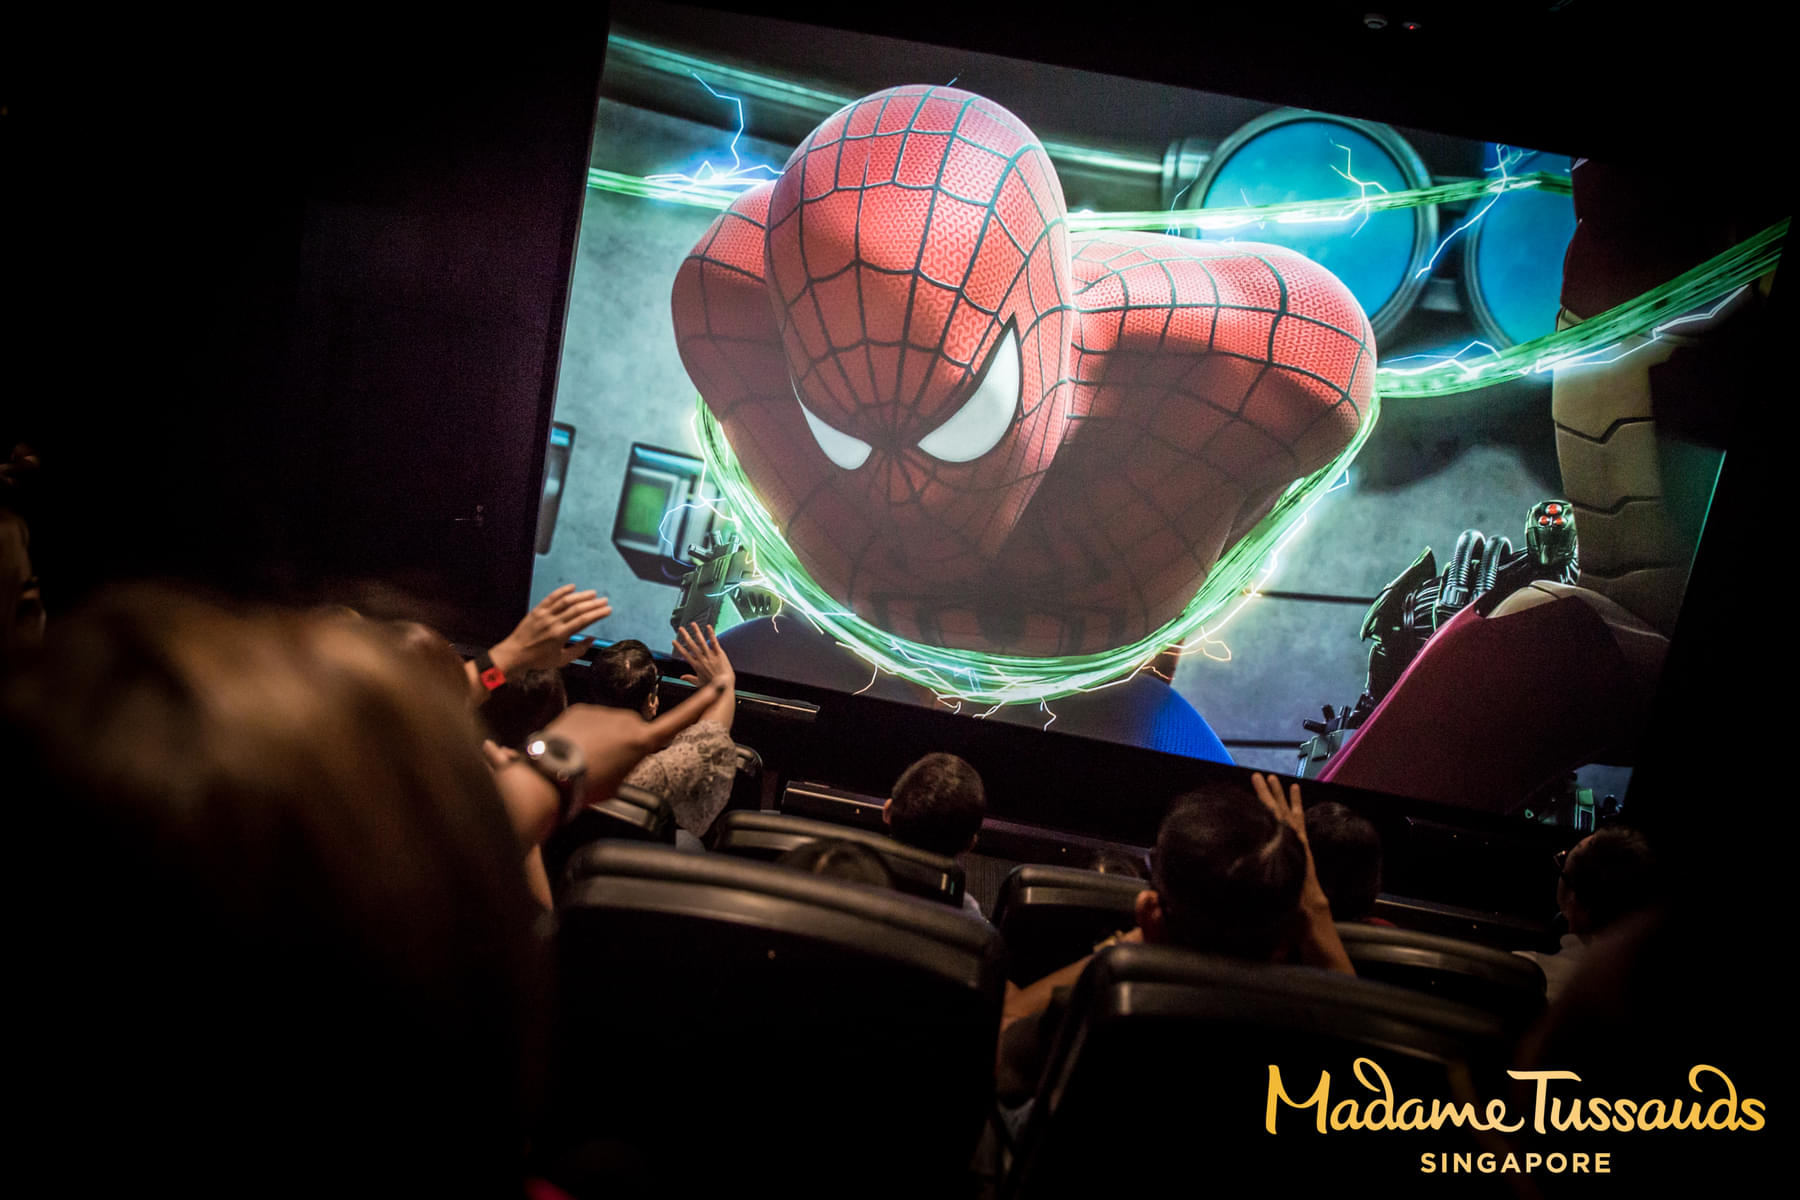 Watch famous Marvel blockbusters in 4D by visiting the Marvel Universe 4D experiecne